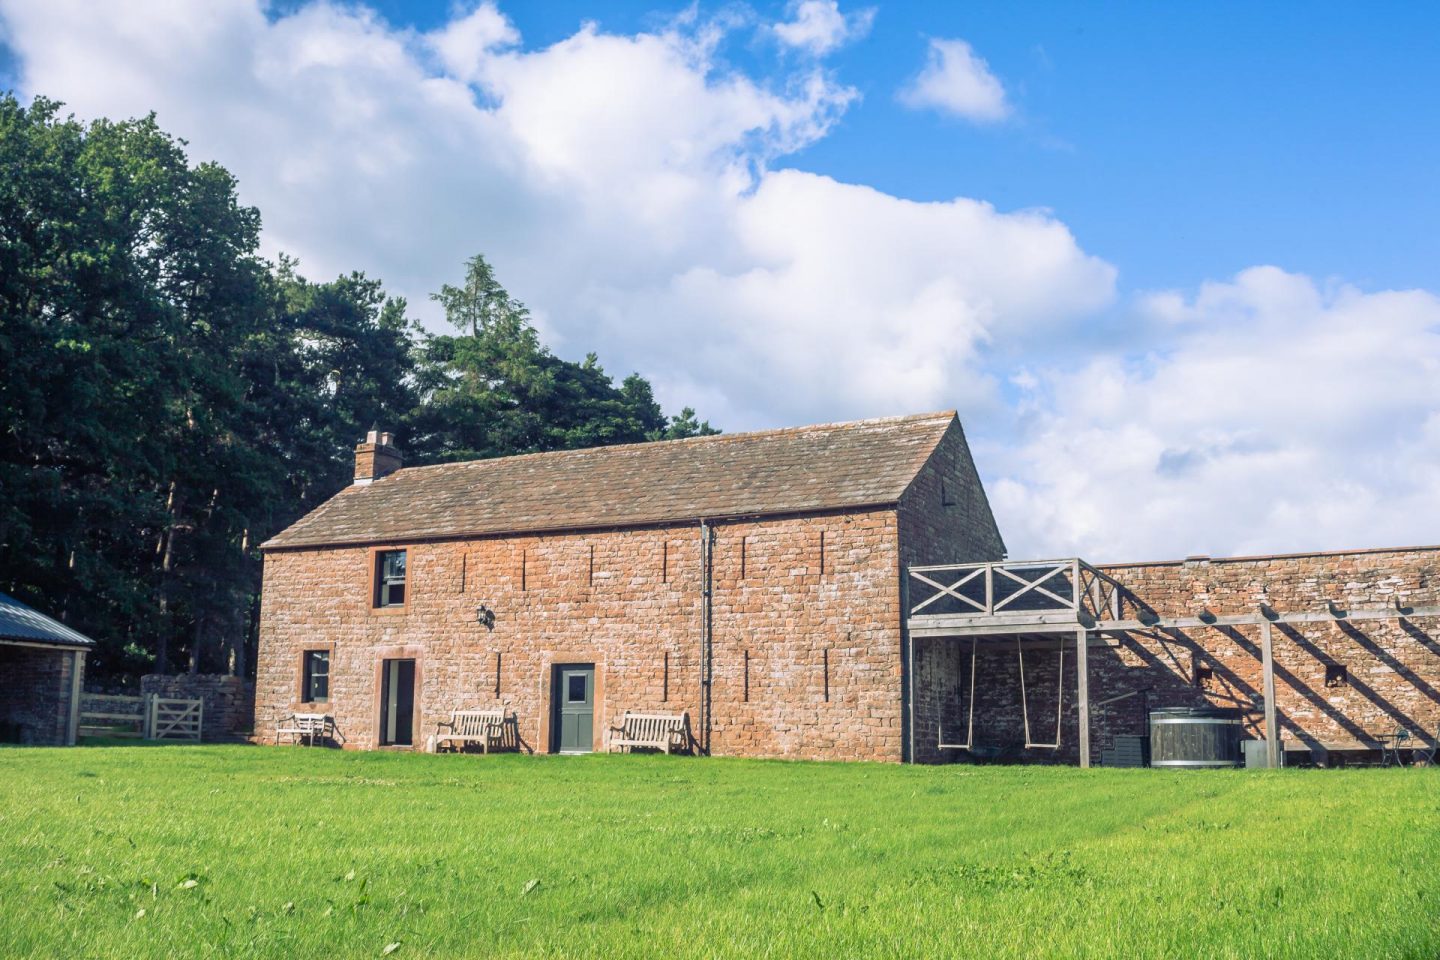 Places to Stay: The Bothy At High Barn, Cumbria, with Canopy and Stars